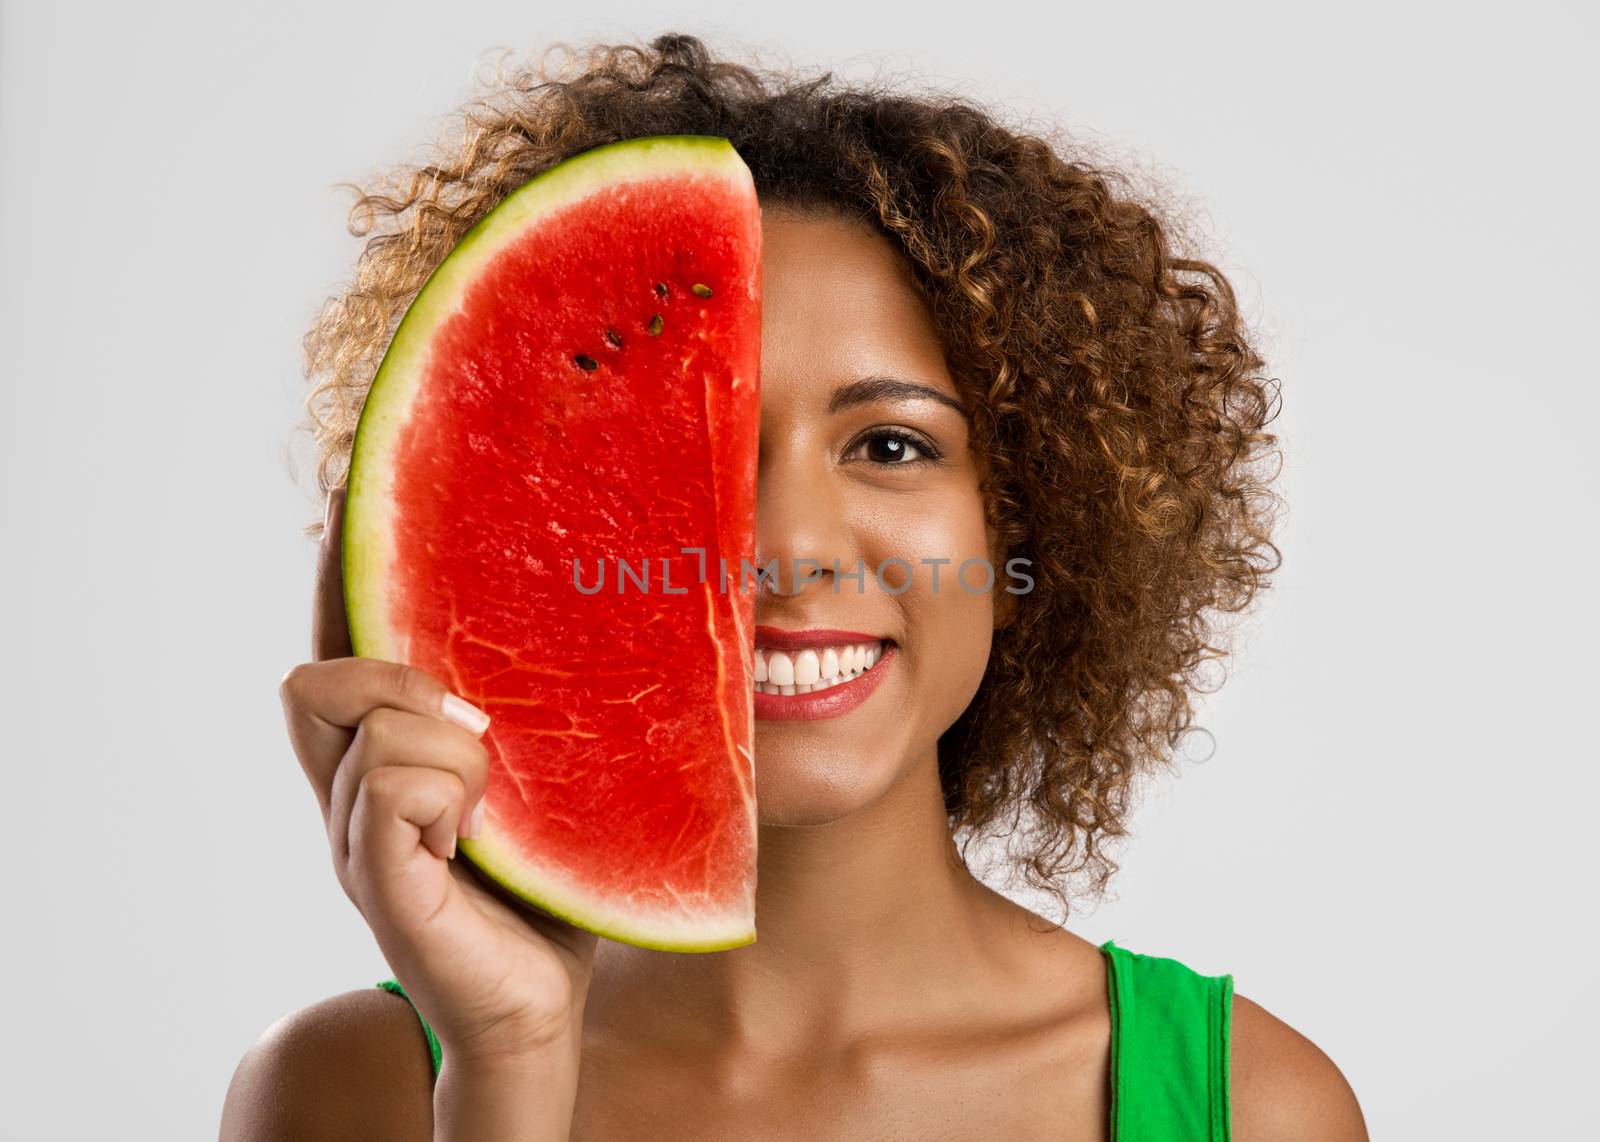 Beautiful African American woman olding a watermelon fruit on her hands